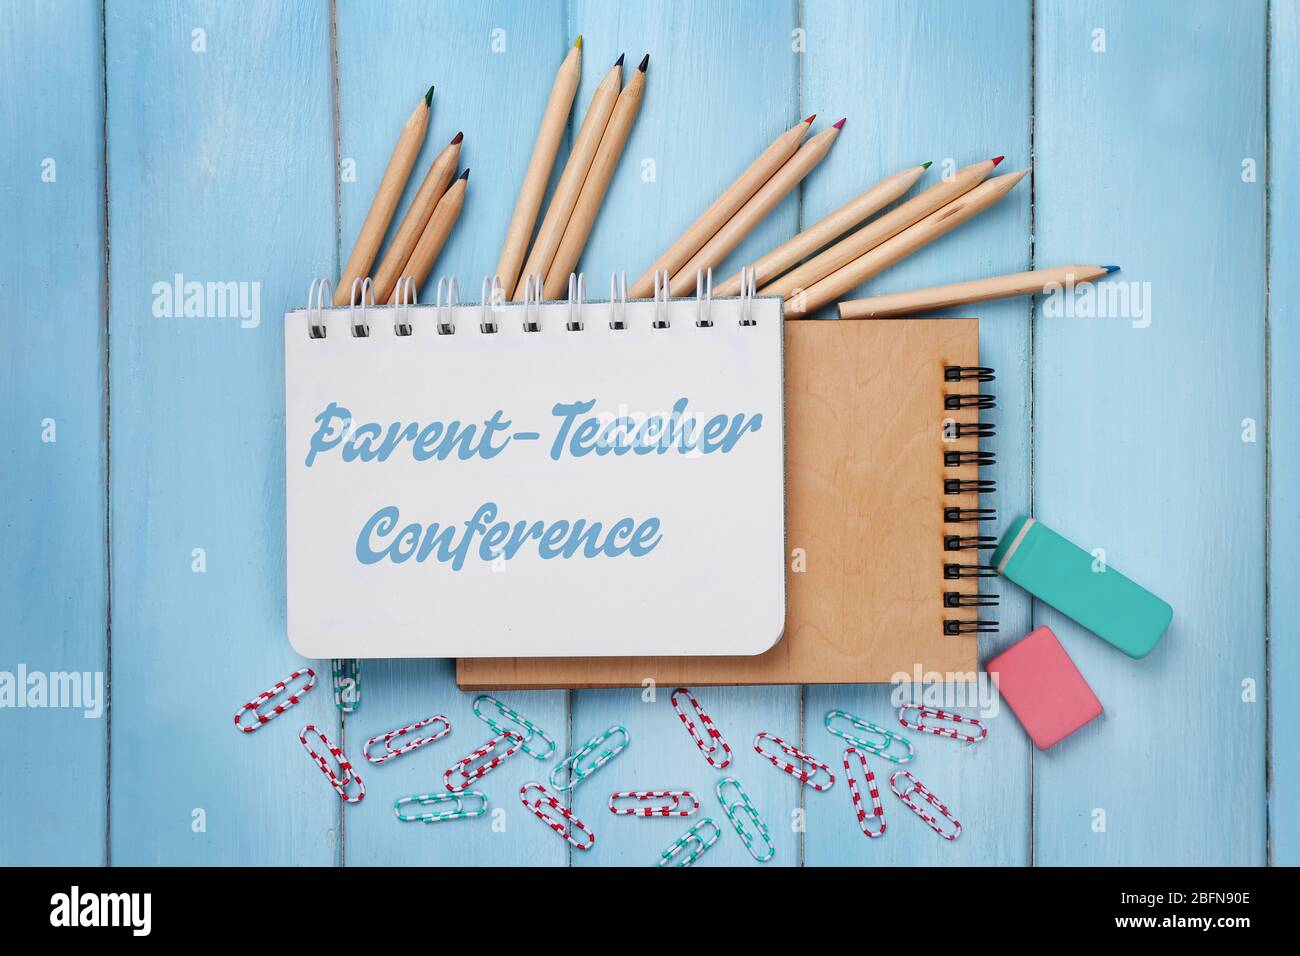 Text PARENT-TEACHER CONFERENCE written in notebook. Stationary on blue wooden background. School concept. Stock Photo